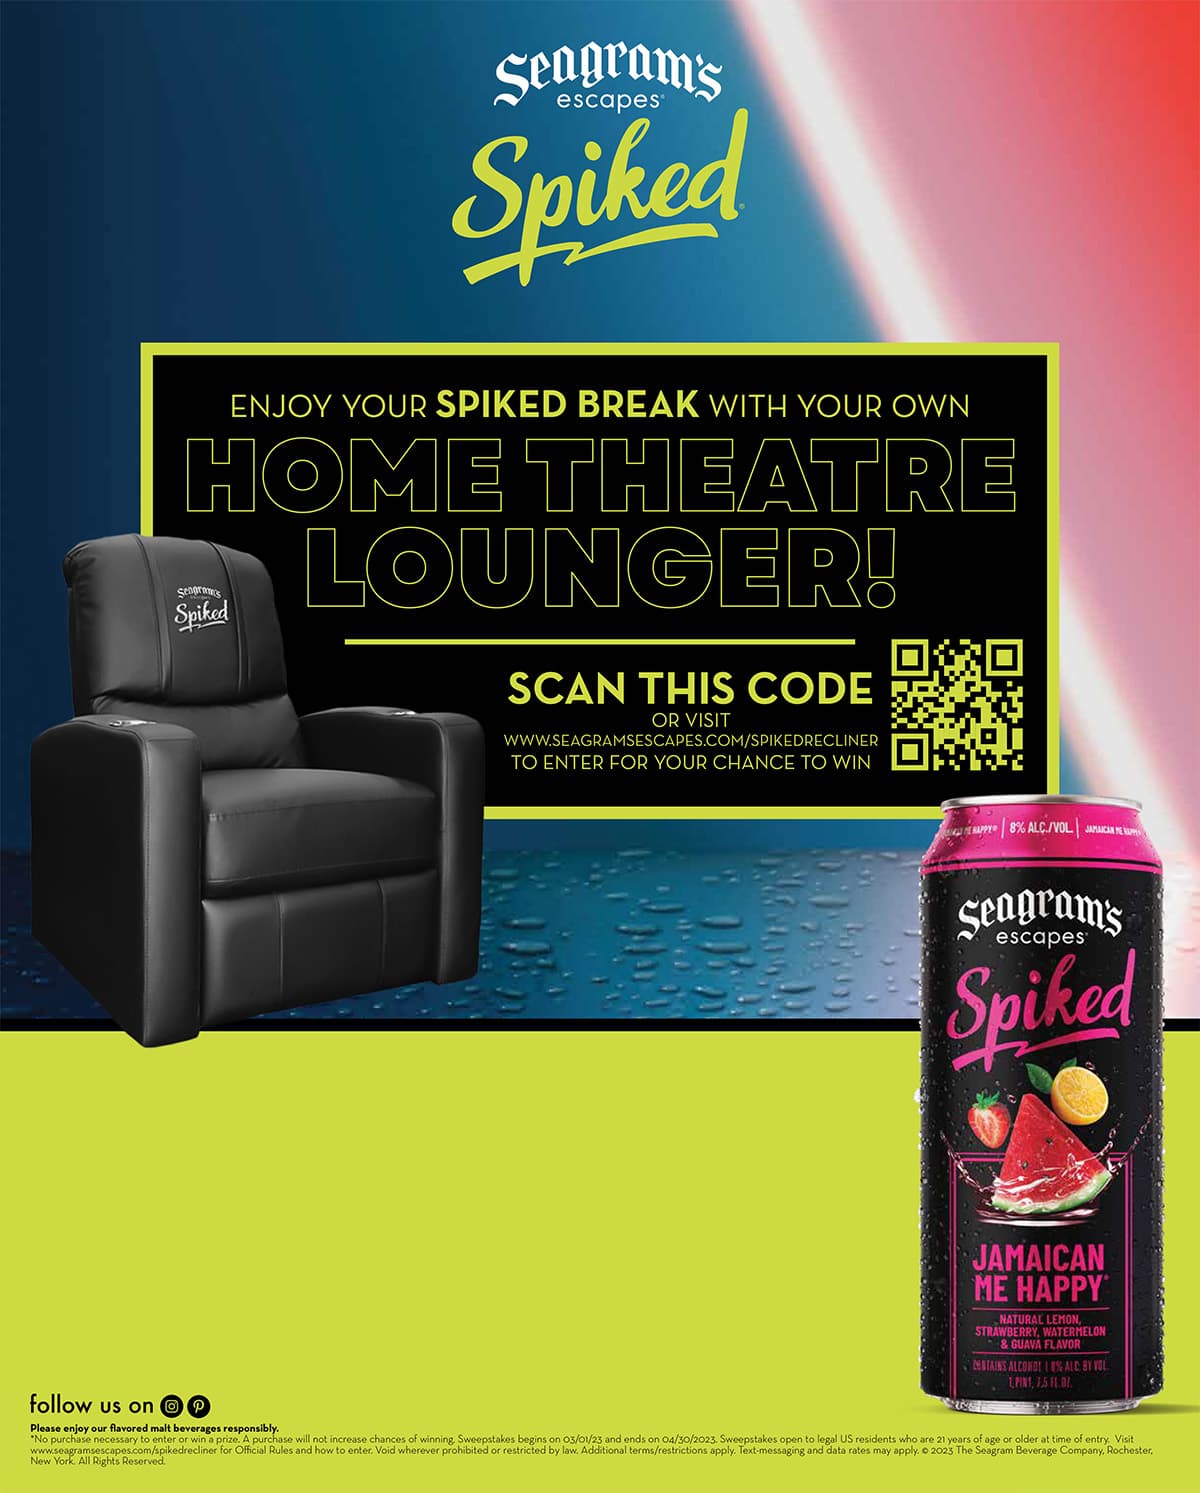 Win a Seagrams Spiked Home Theater Recliner!